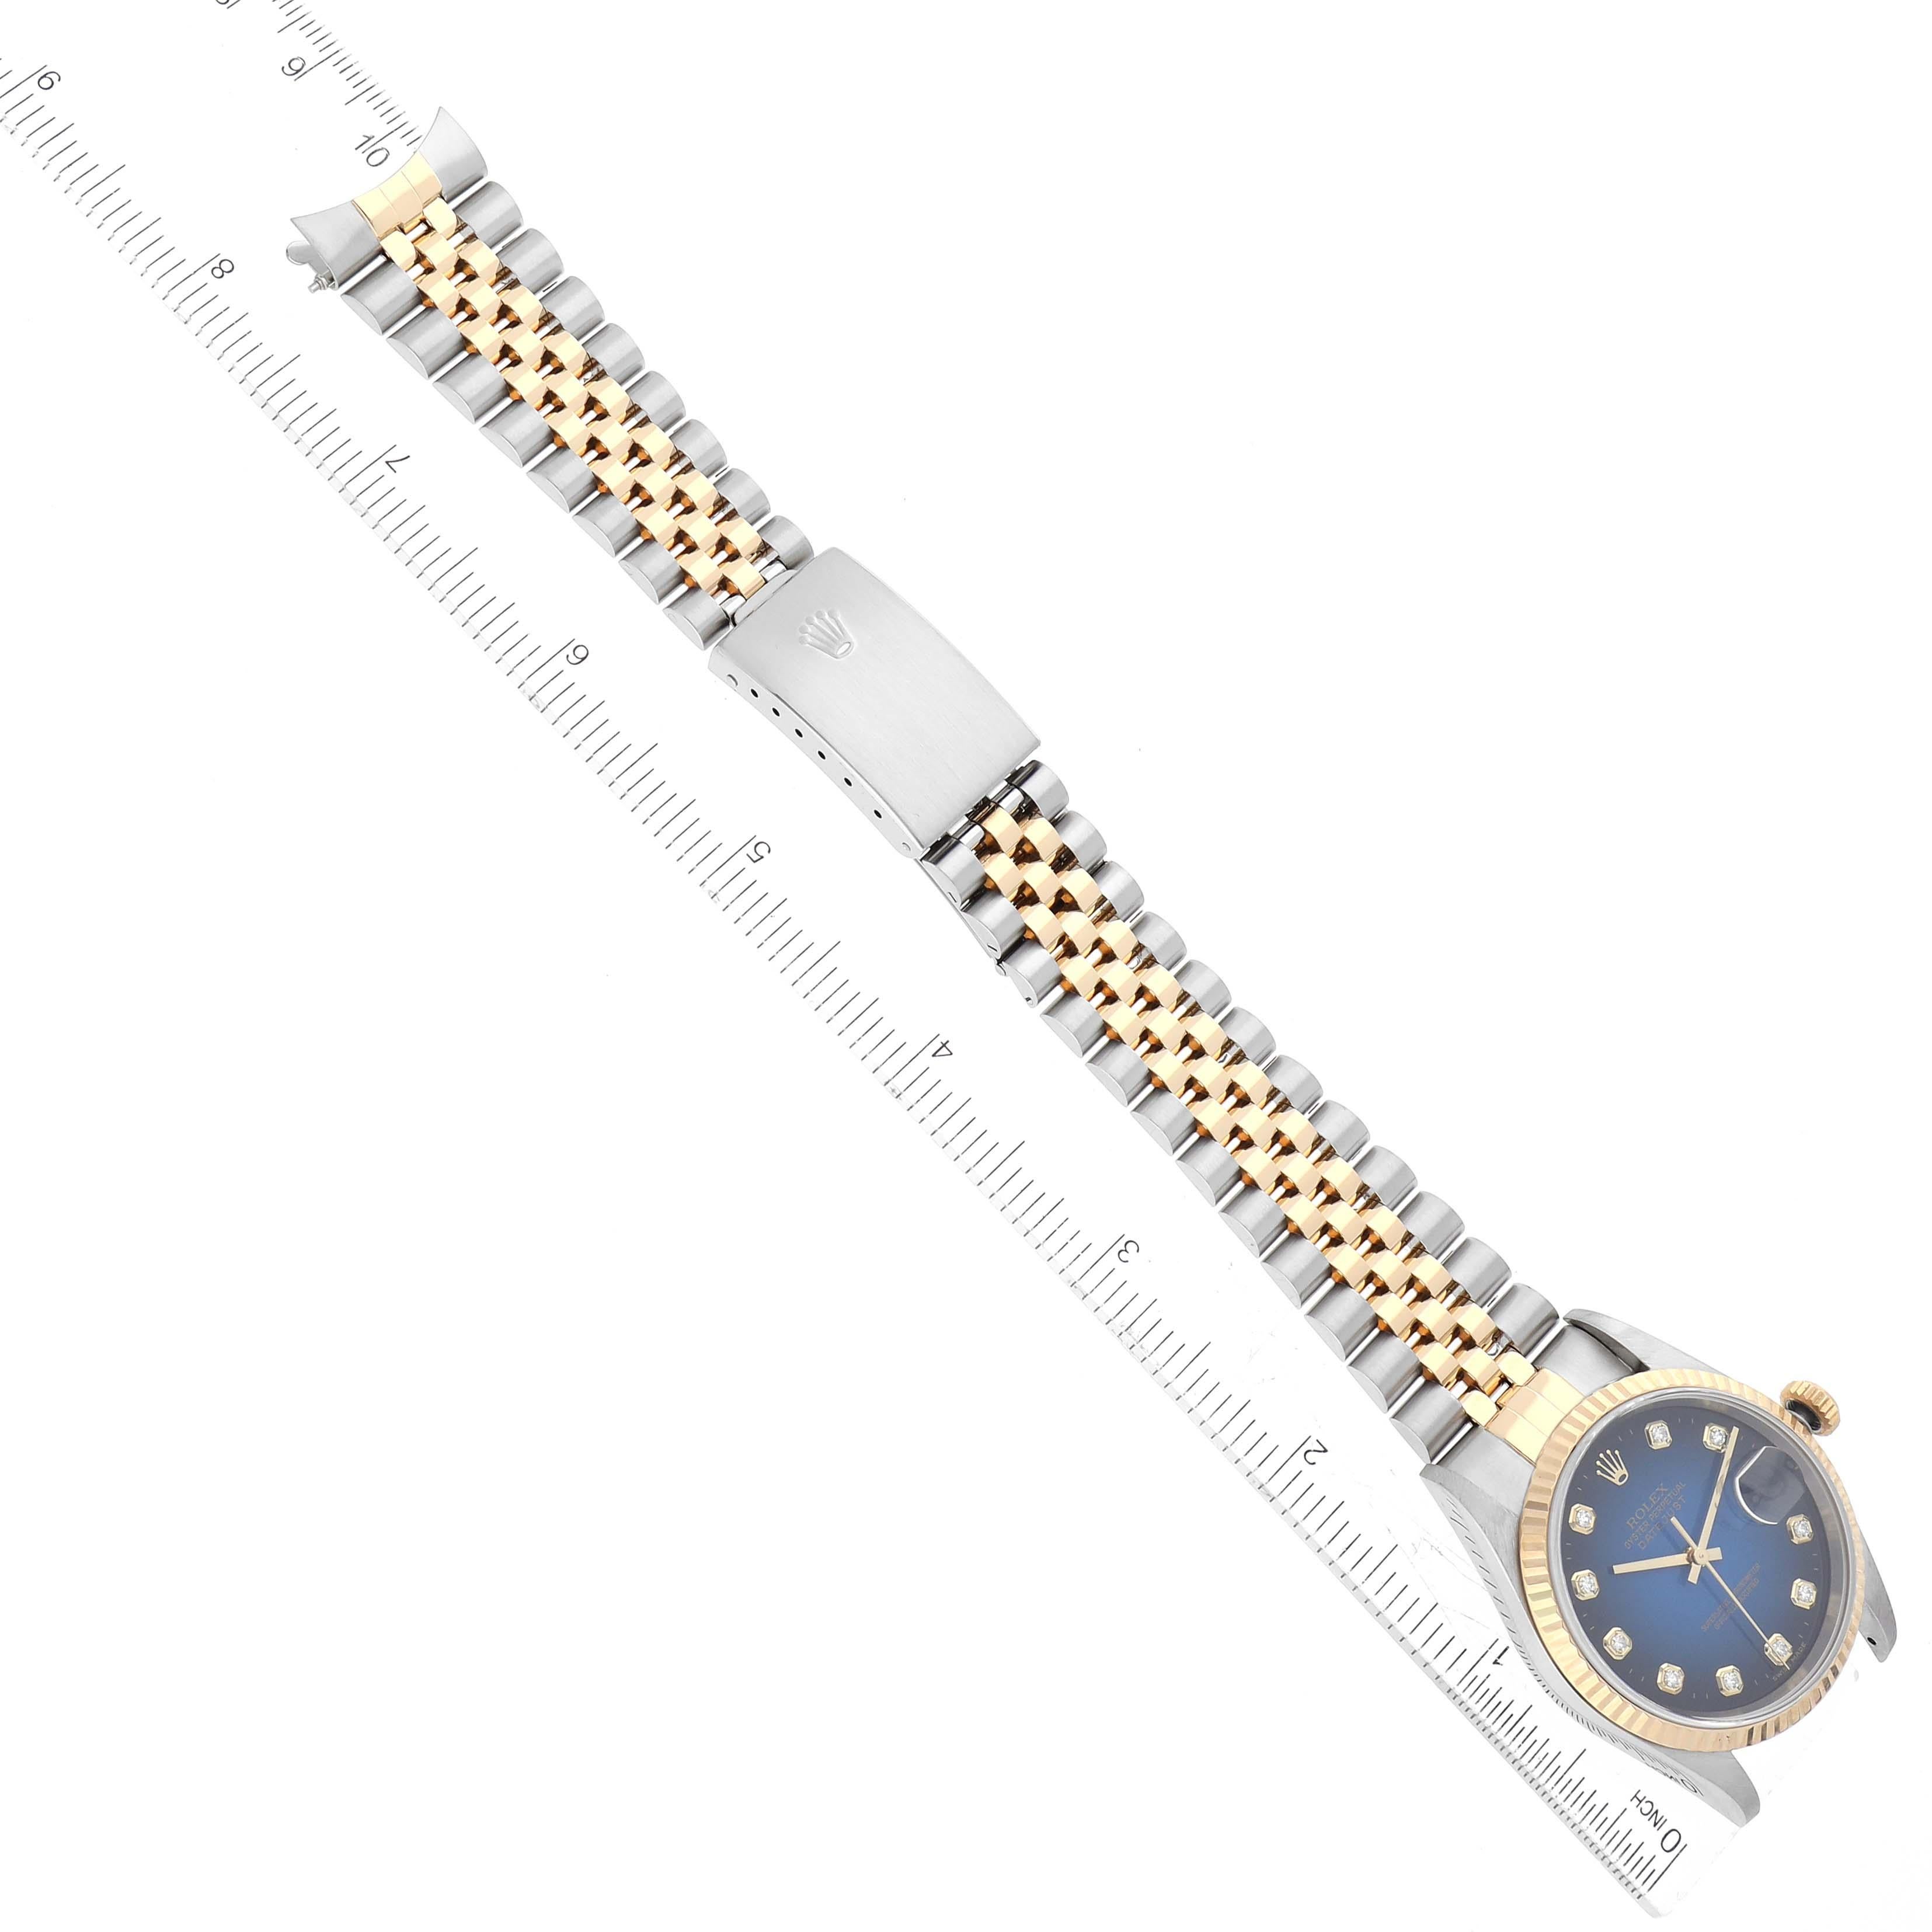 Rolex Datejust Blue Diamond Dial Steel Yellow Gold Mens Watch 16233 Box Papers 6